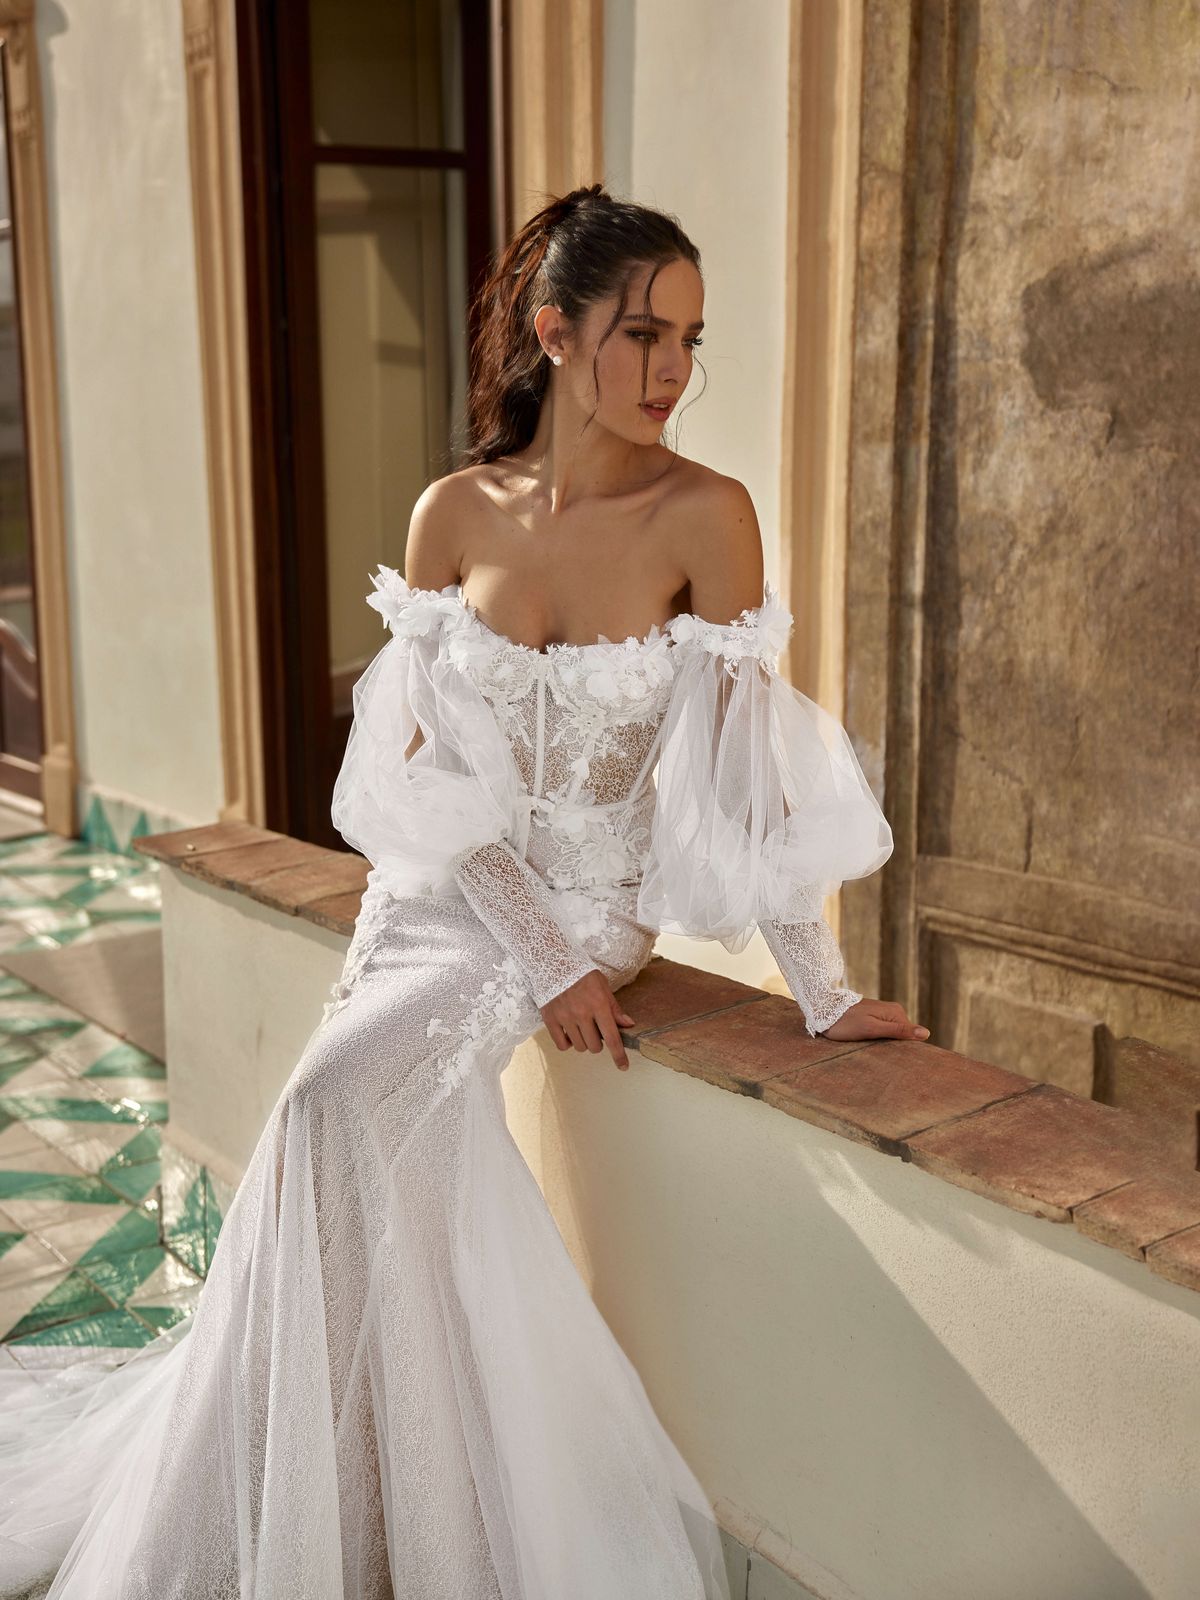 Mermaid lace wedding dress Polina with removable voluminous sleeves and decorated with flowers by rara avis designer. 6